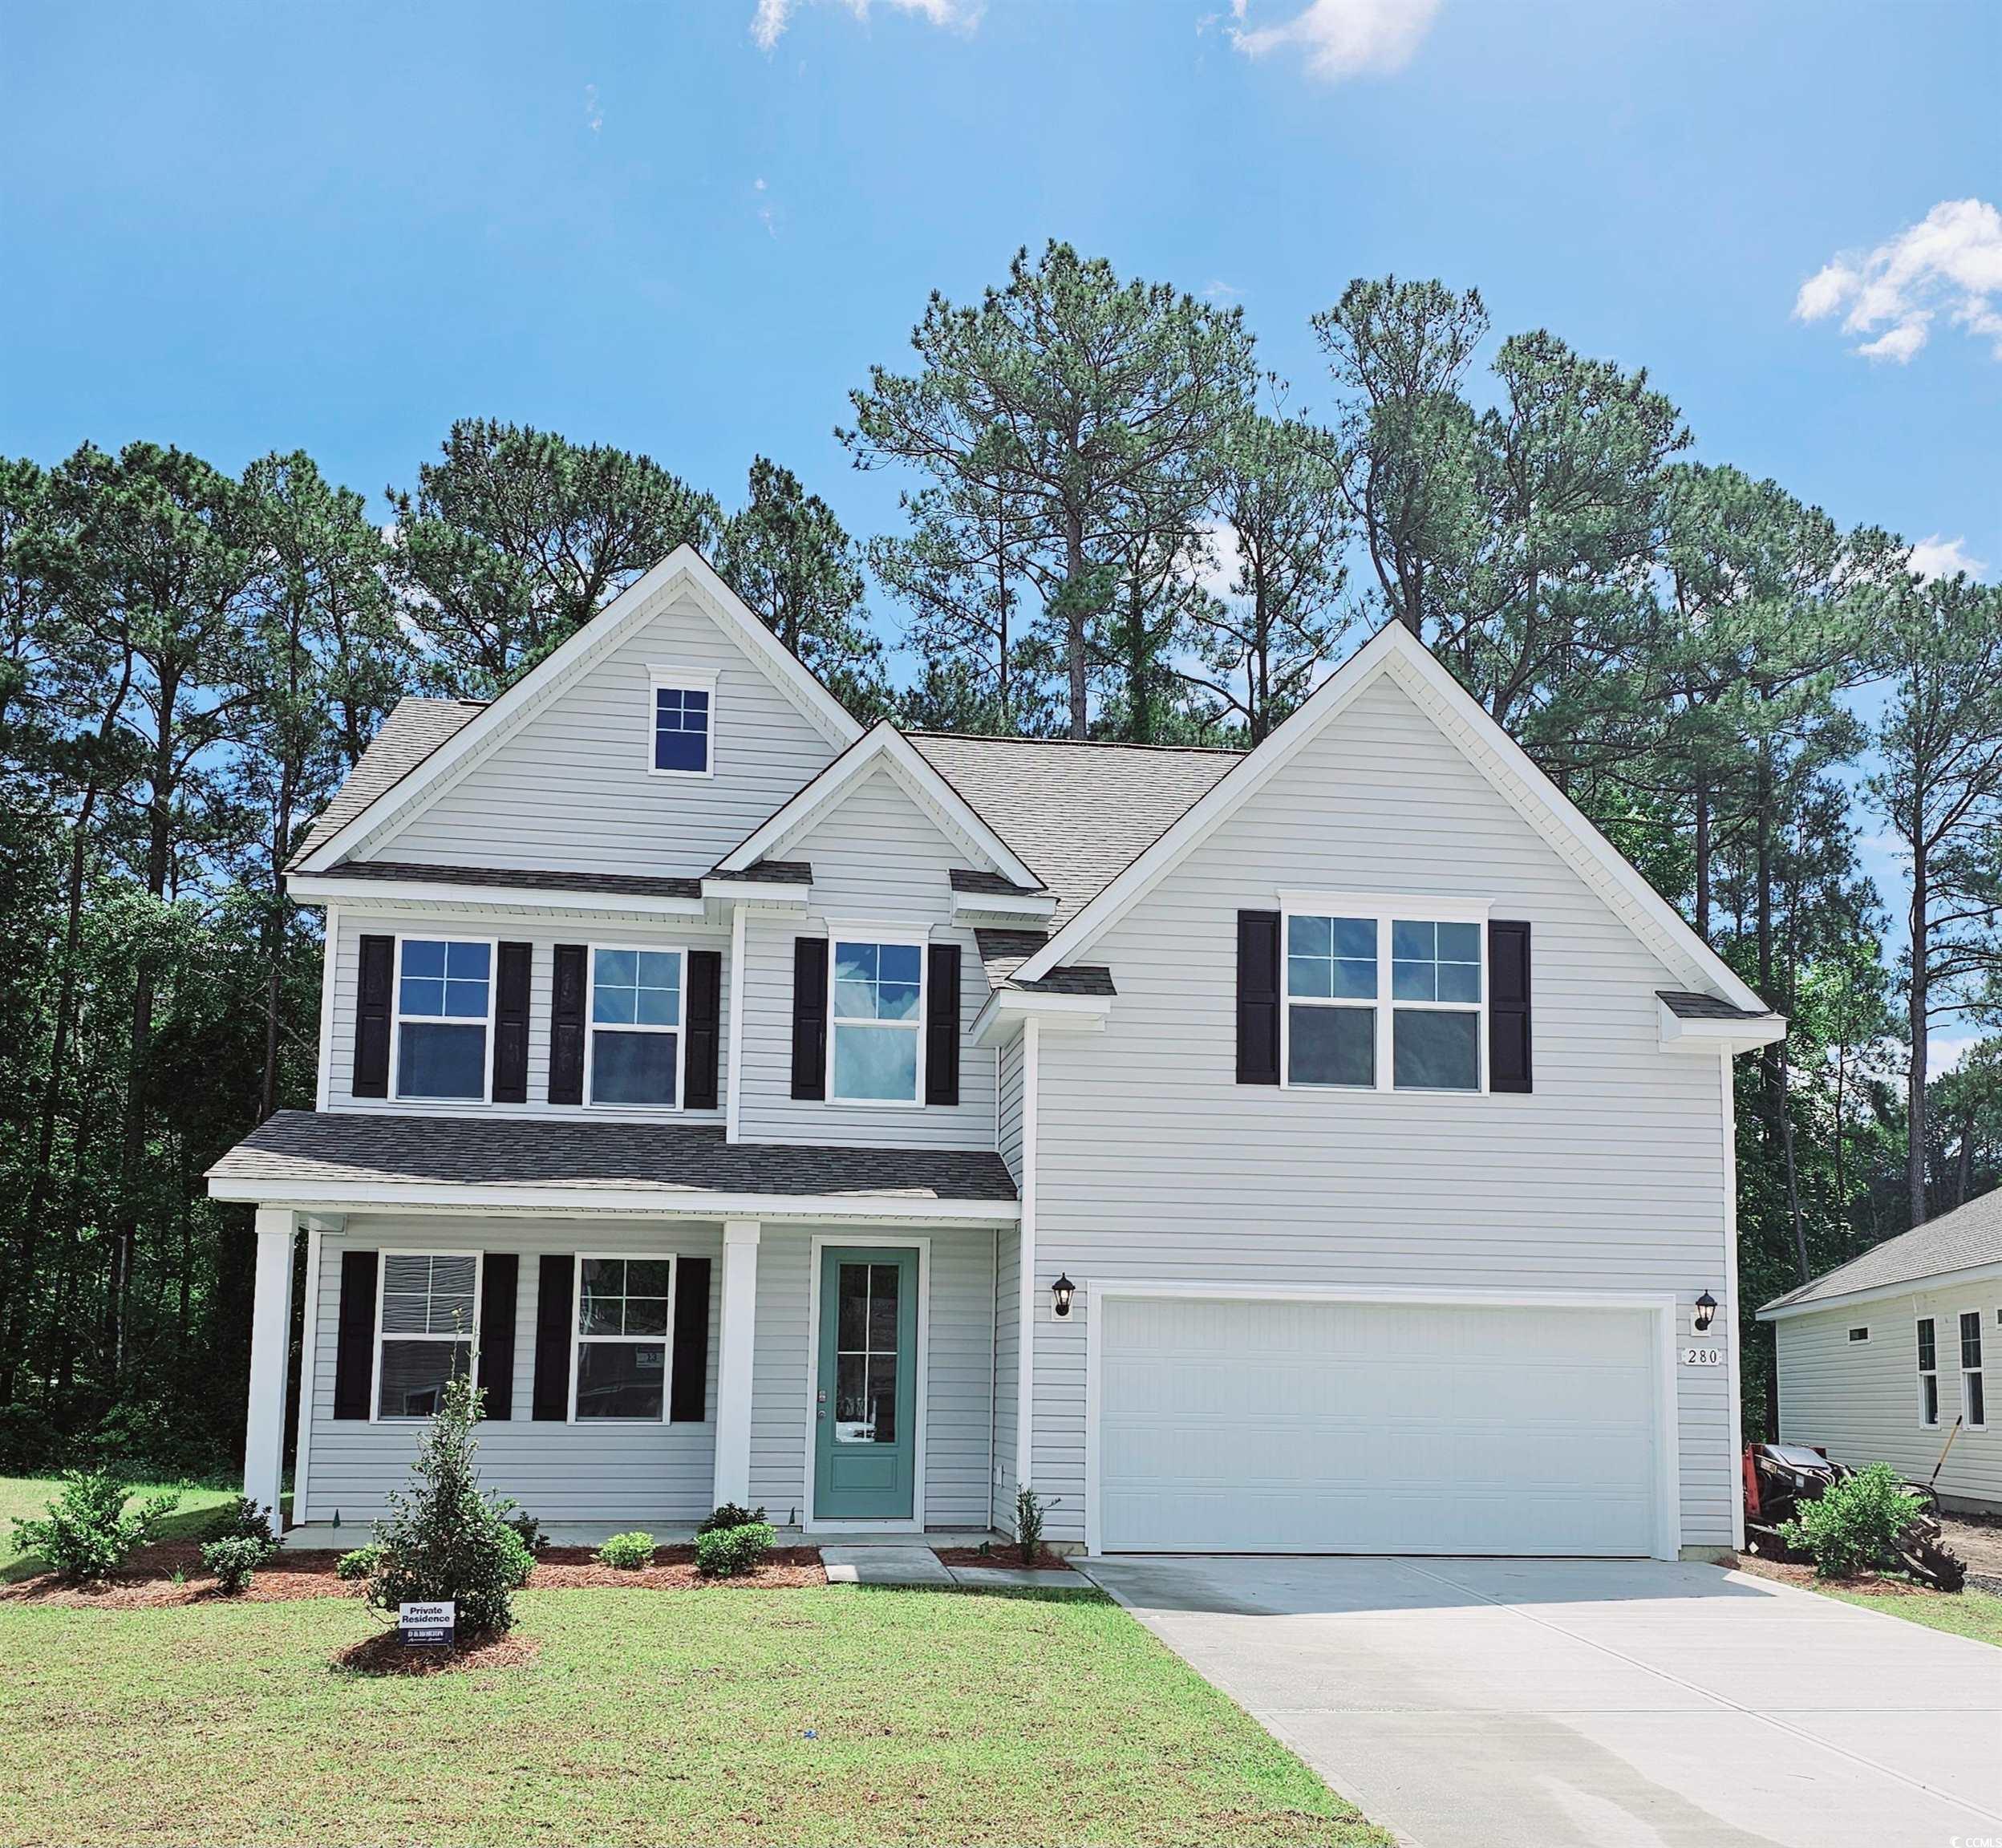 come see out newest community in the murrells inlet conveniently located to all the area has to offer! the forrester is one of our most popular floor plans! when you first enter the home there is a gorgeous 2-story foyer with a catwalk overlooking the entry! you will pass by the elegant formal dining room as you head into your great room and oversized kitchen. the kitchen features one of our largest islands measuring in at nearly 10' long! it also boasts a ton of storage with 36" painted cabinets. lastly on the first floor is a bedroom and full bath that is great for guests or can double as an office space. head upstairs to your master suite with a large walk-in closet and en suite bathroom with 5ft. shower and spacious double vanity. two additional bedrooms with a full bath in between are across the catwalk. one of the best features of this home is the huge bonus room with vaulted ceilings over the garage that can be the 5th bedroom!  this is america's smart home! each of our homes comes with an industry leading smart home technology package that will allow you to control the thermostat, front door light and lock, and video doorbell from your smartphone or with voice commands to alexa. *photos are of a similar forrester home.  (home and community information, including pricing, included features, terms, availability and amenities, are subject to change prior to sale at any time without notice or obligation. square footages are approximate. pictures, photographs, colors, features, and sizes are for illustration purposes only and will vary from the homes as built. equal housing opportunity builder.)